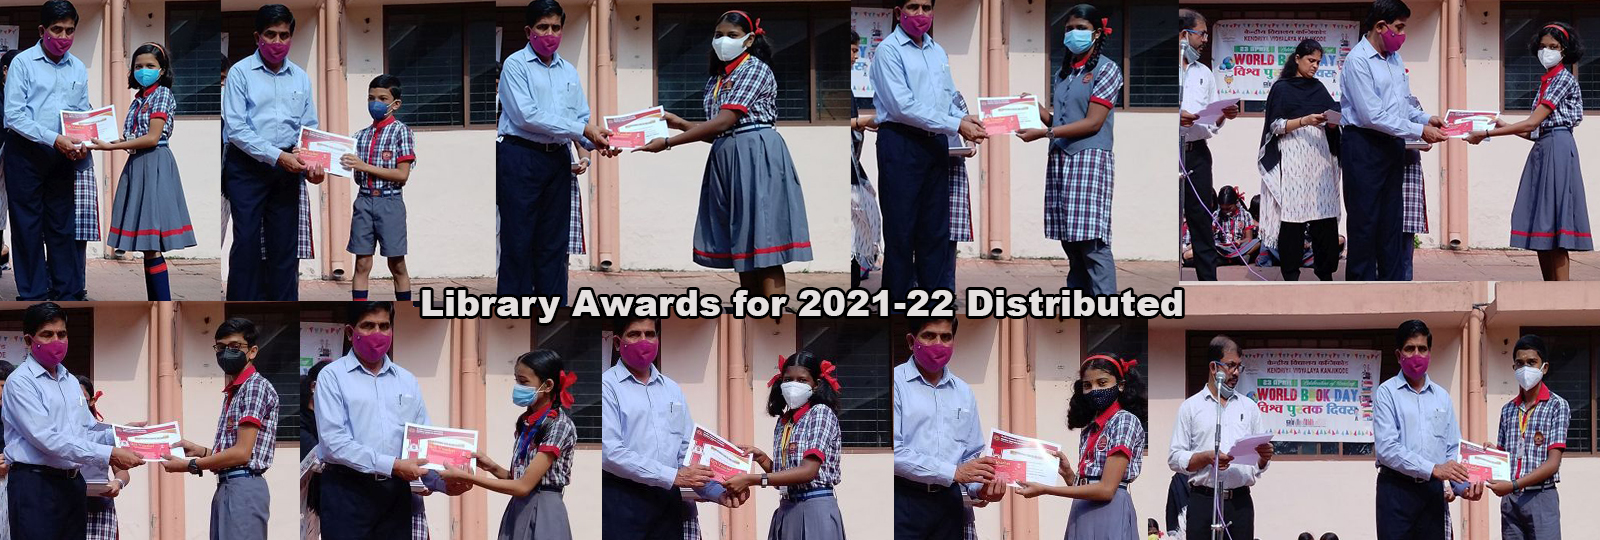 Library Awards for 2021-22